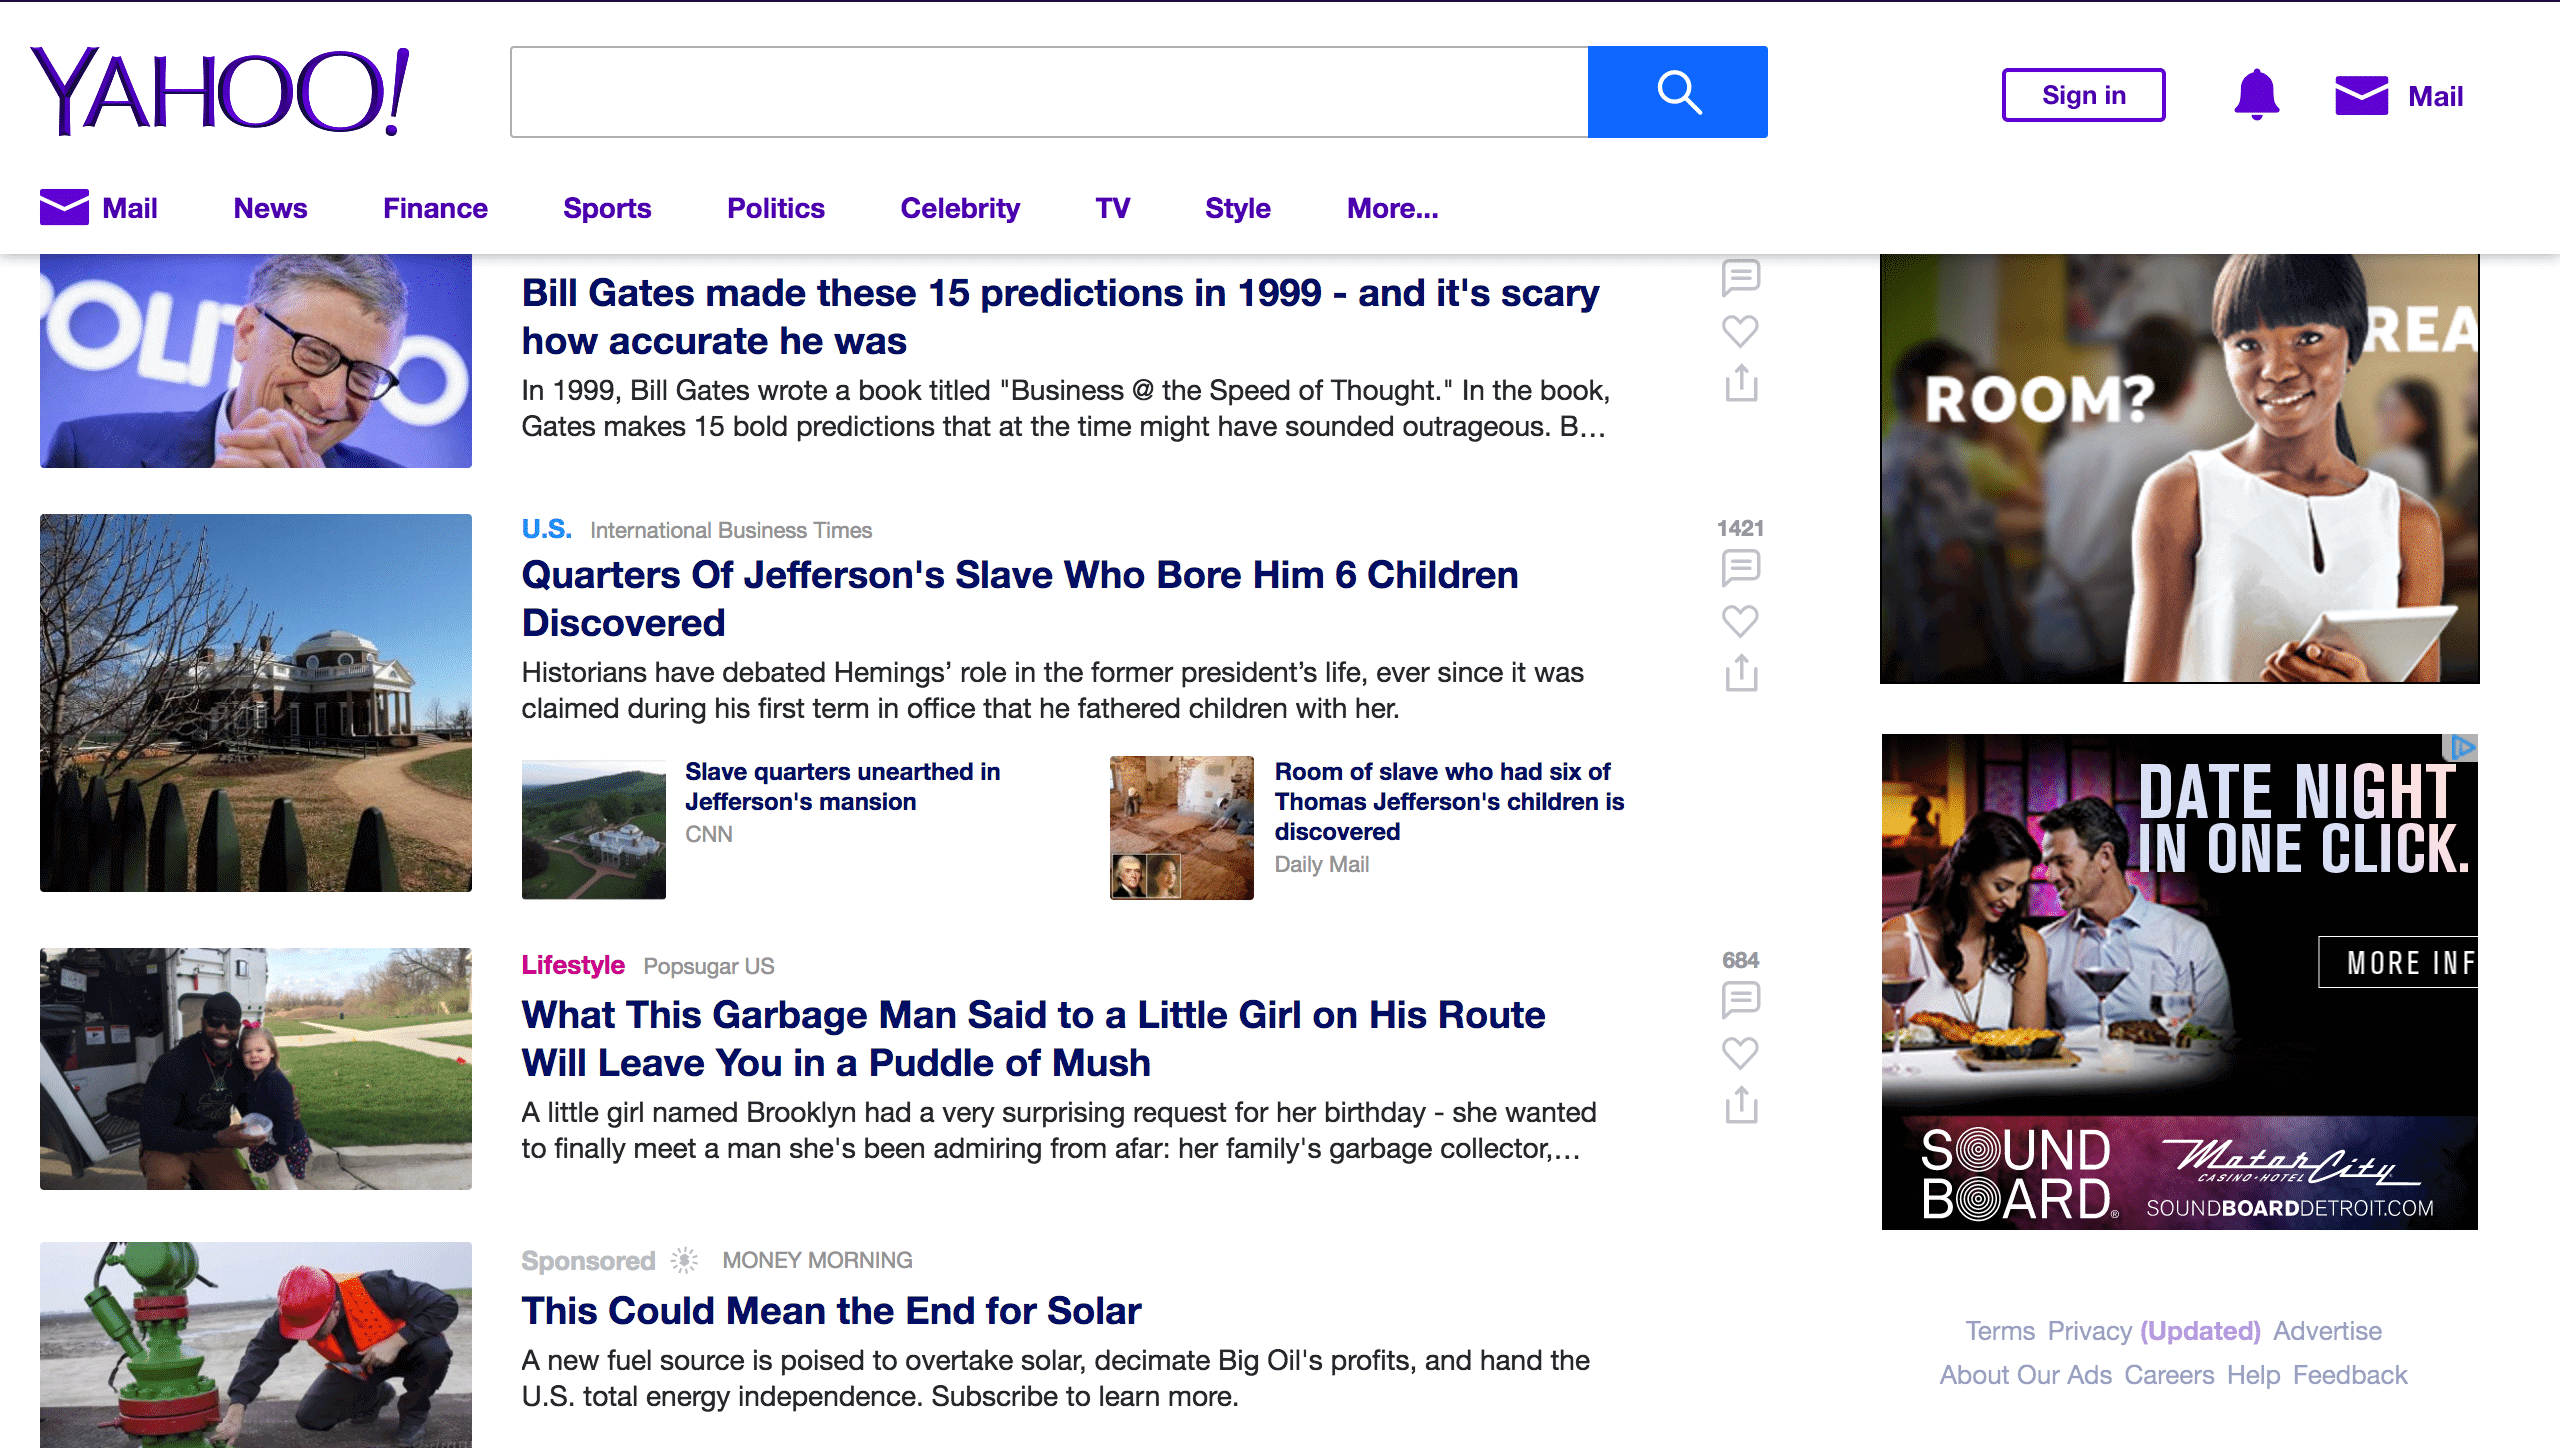 Yahoo! news page showing multiple news stories and advertisements